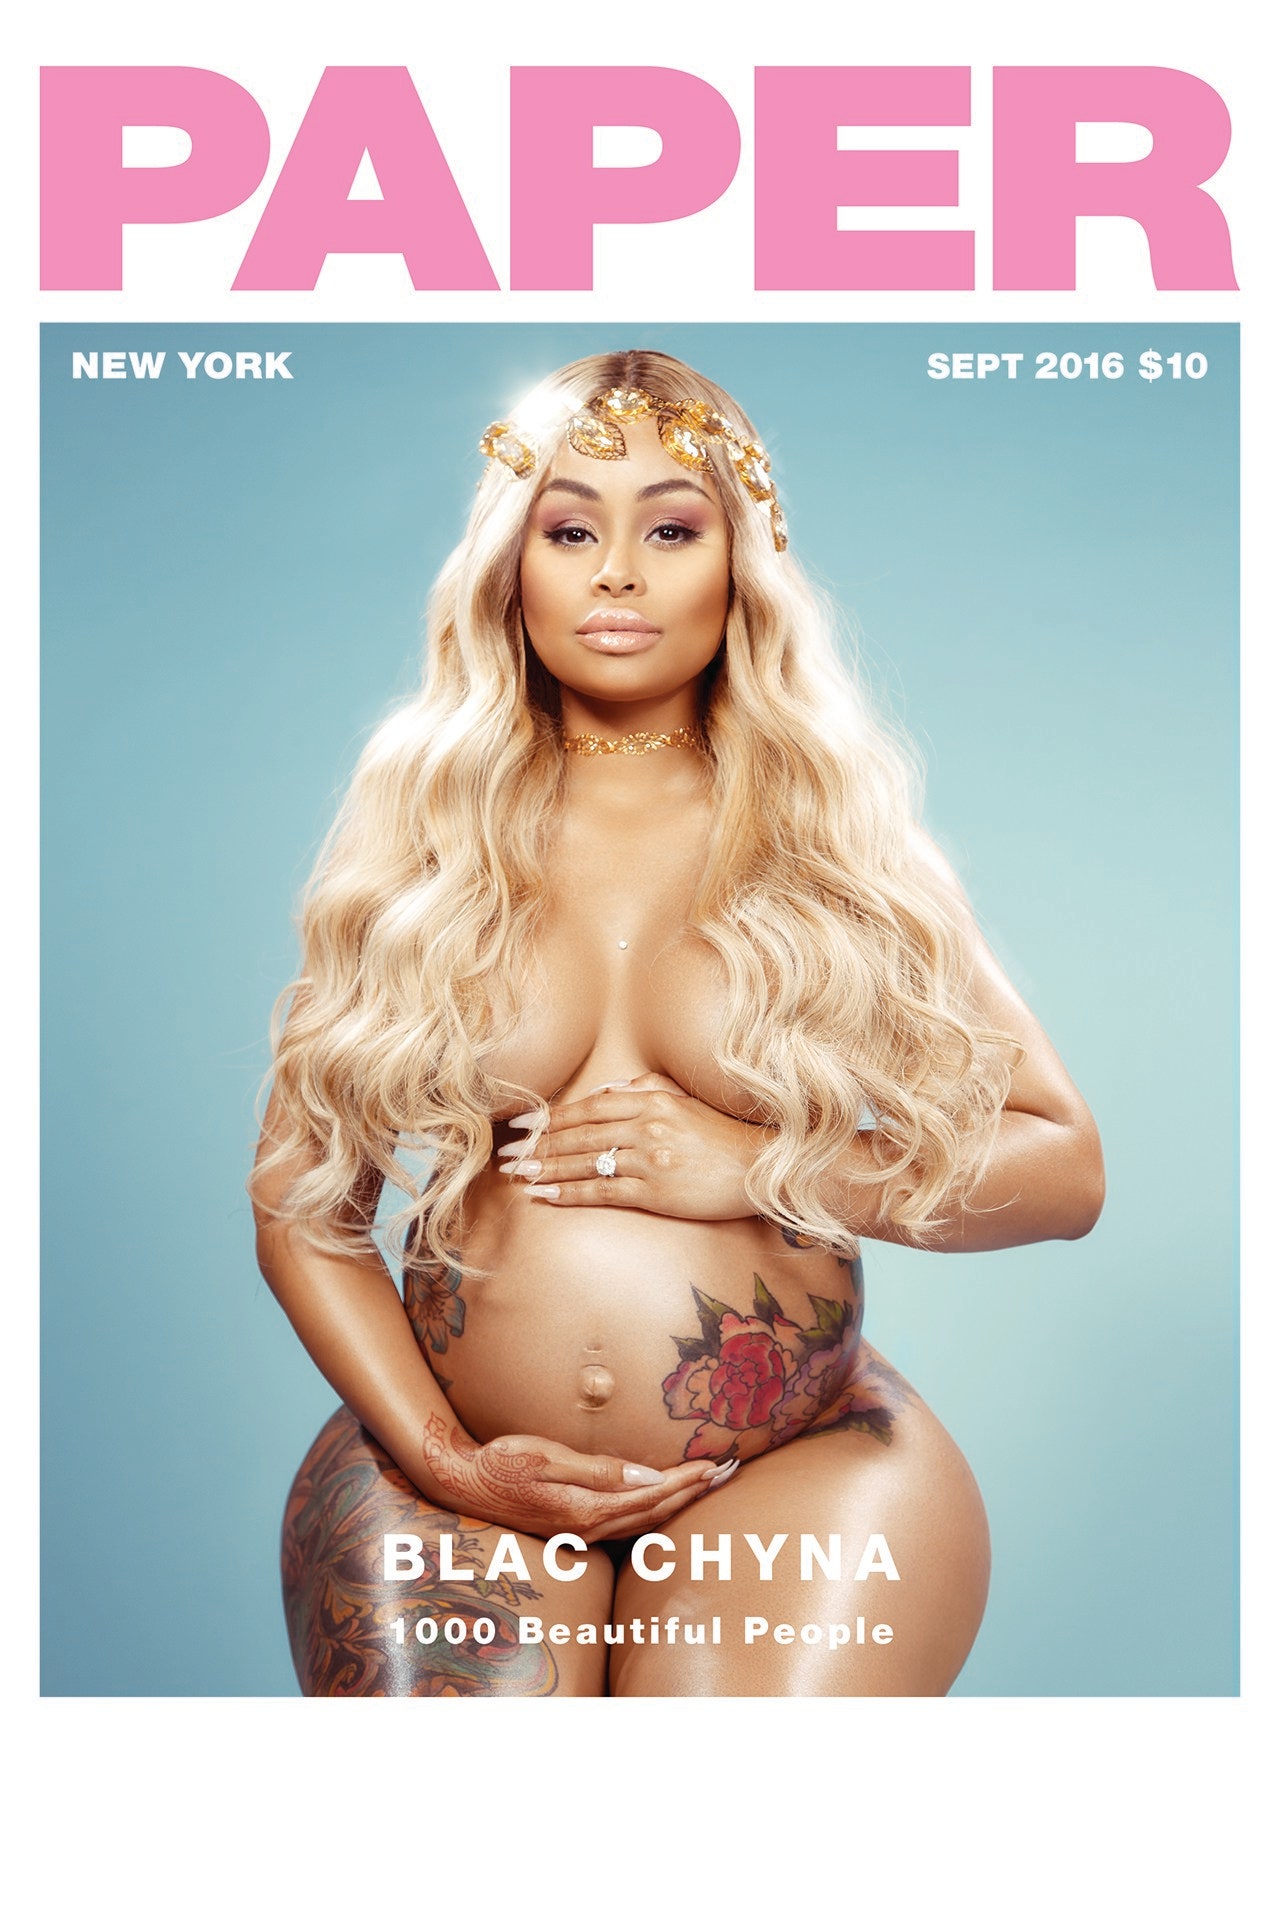 danielle strauch recommends blac cyna nudes pic